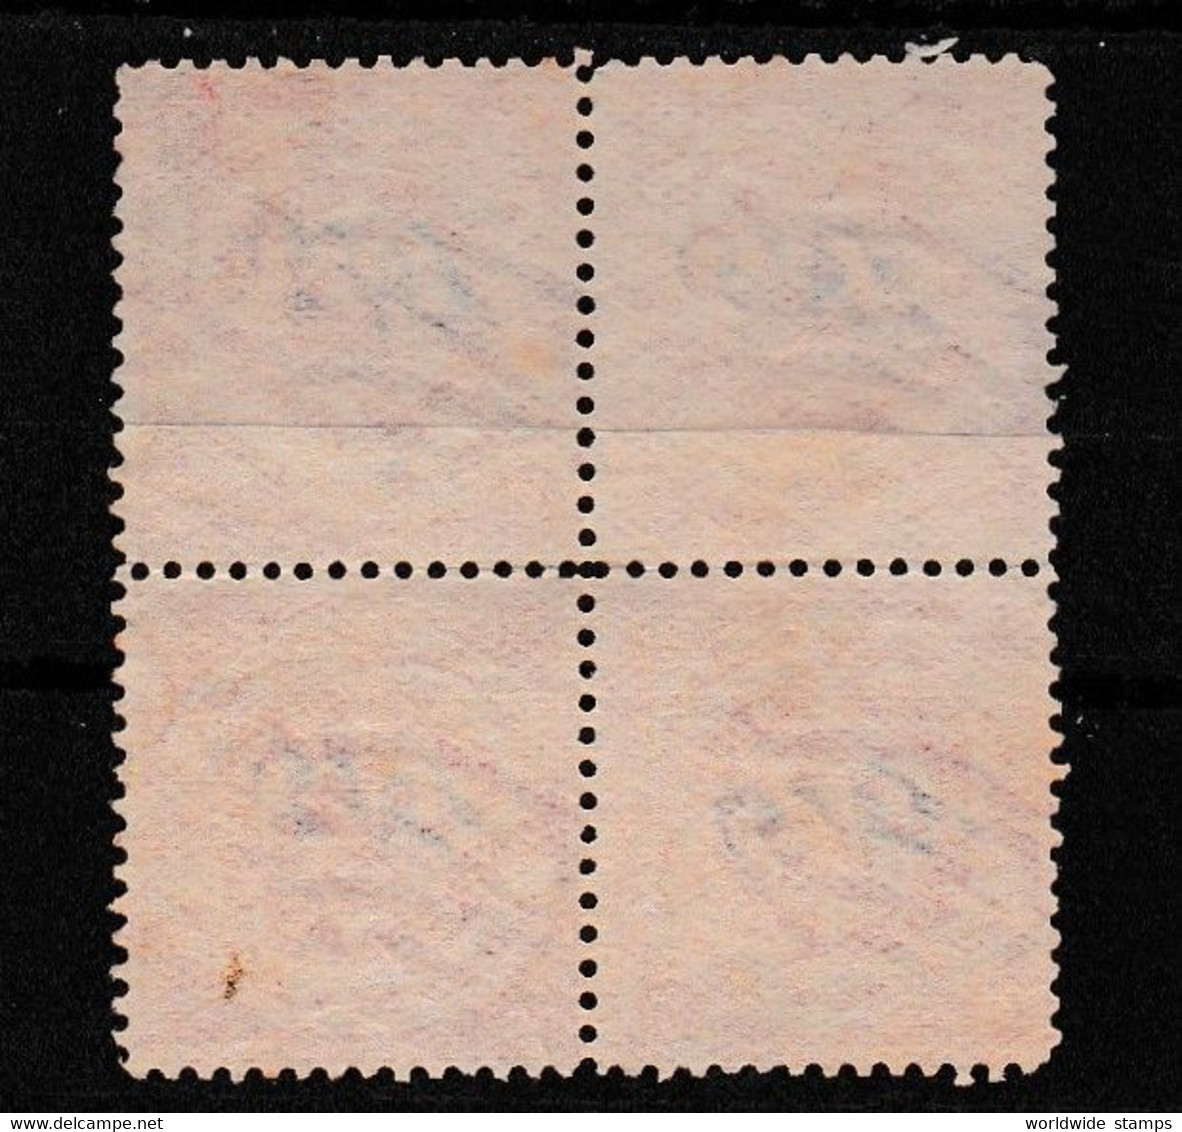 INDIA HYDERABAD 1915 Official Issue, 1 Anna Block Of 4 Stamps Black Overprint. - Hyderabad